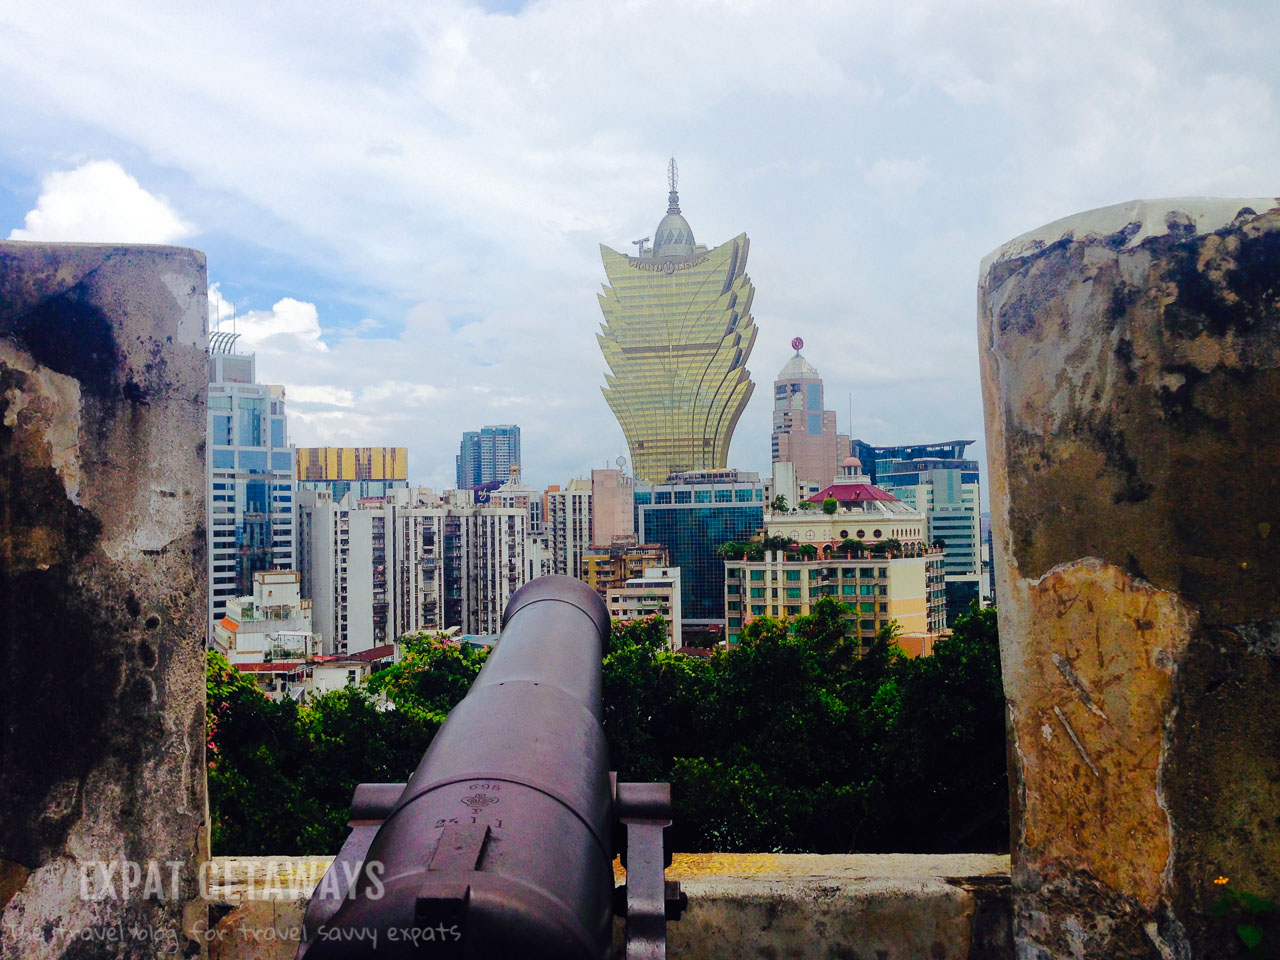 The old and the new in Macau. Canons at the Monte Fort were used to protect the Portuguese colony from pirates. 